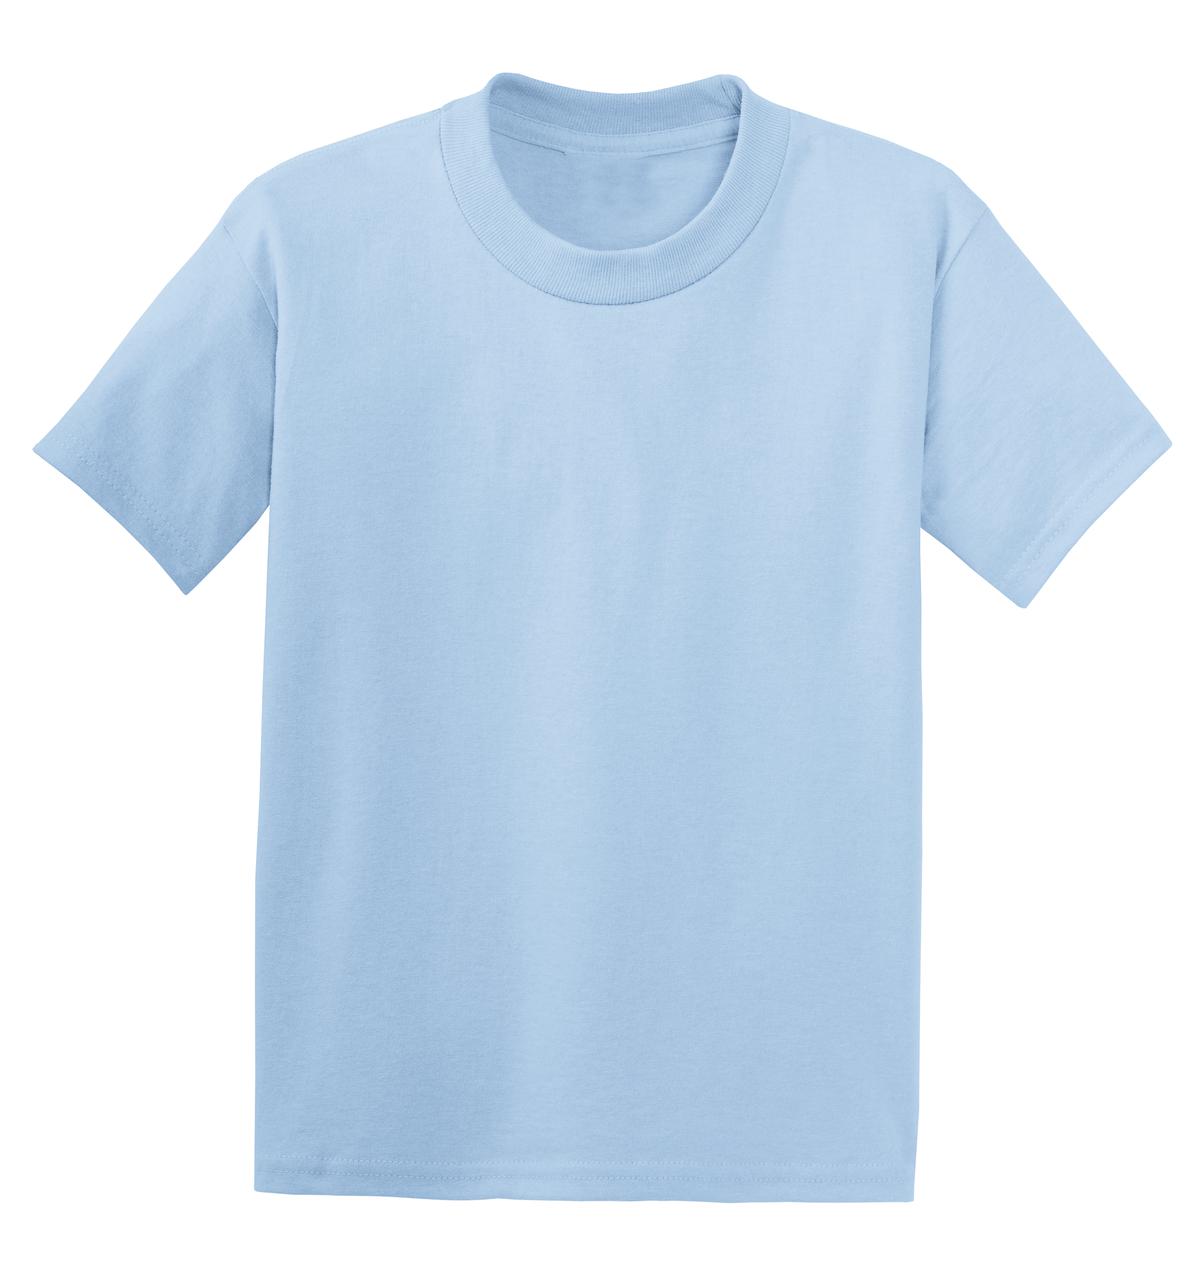 Hanes® - Youth EcoSmart® 50/50 Cotton/Poly T-Shirt.  5370